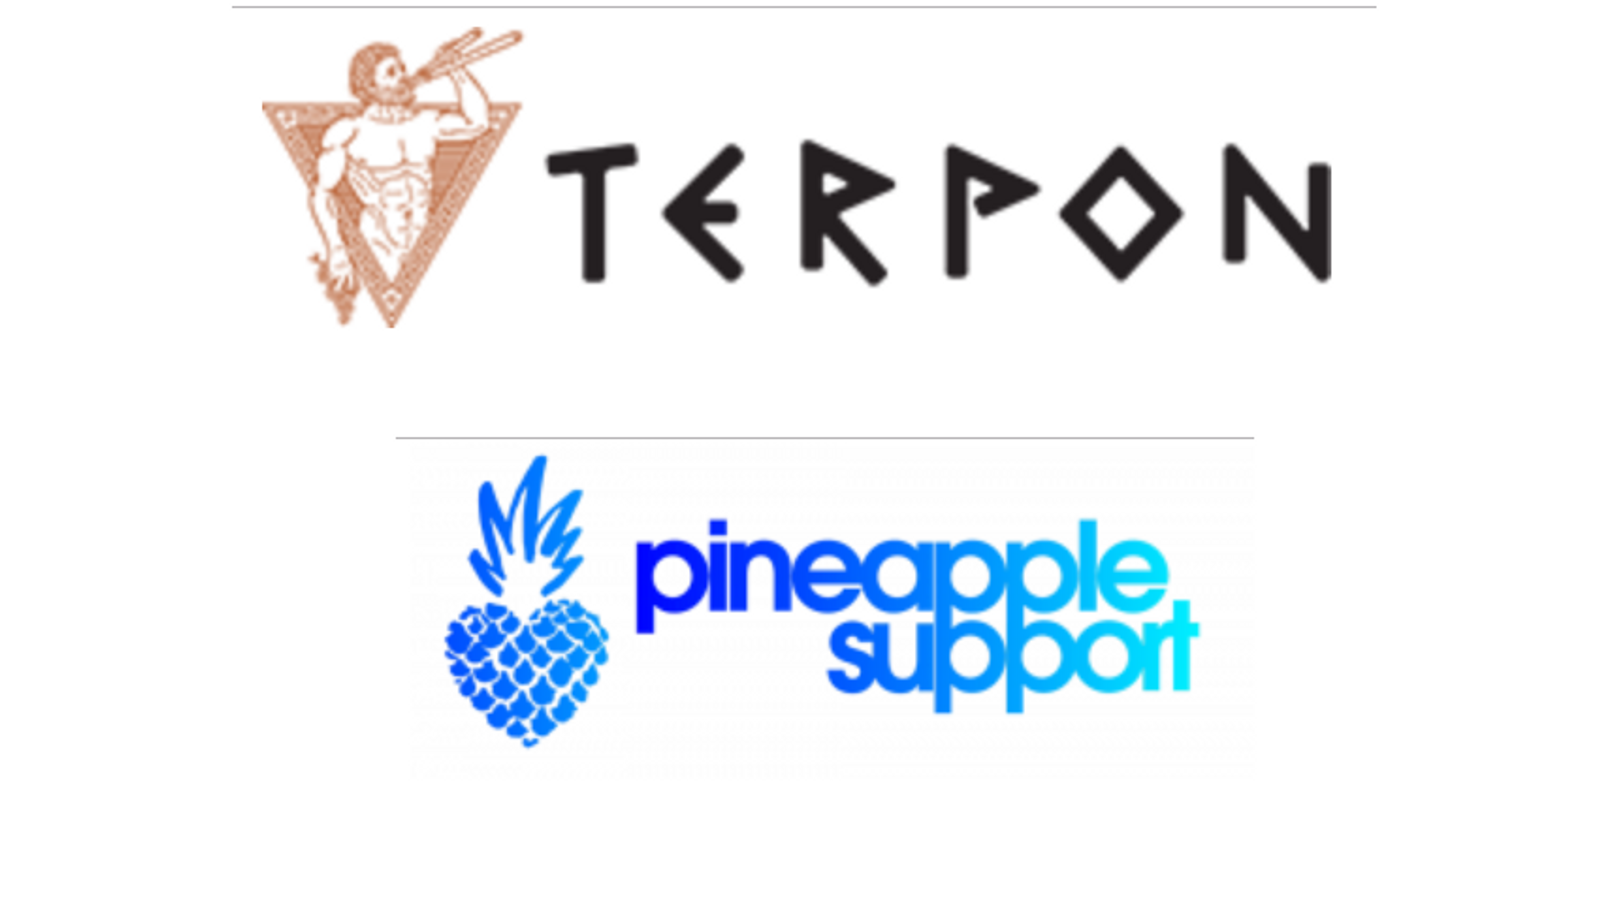 Terpon, Pineapple Support Working Together On Shared Mission